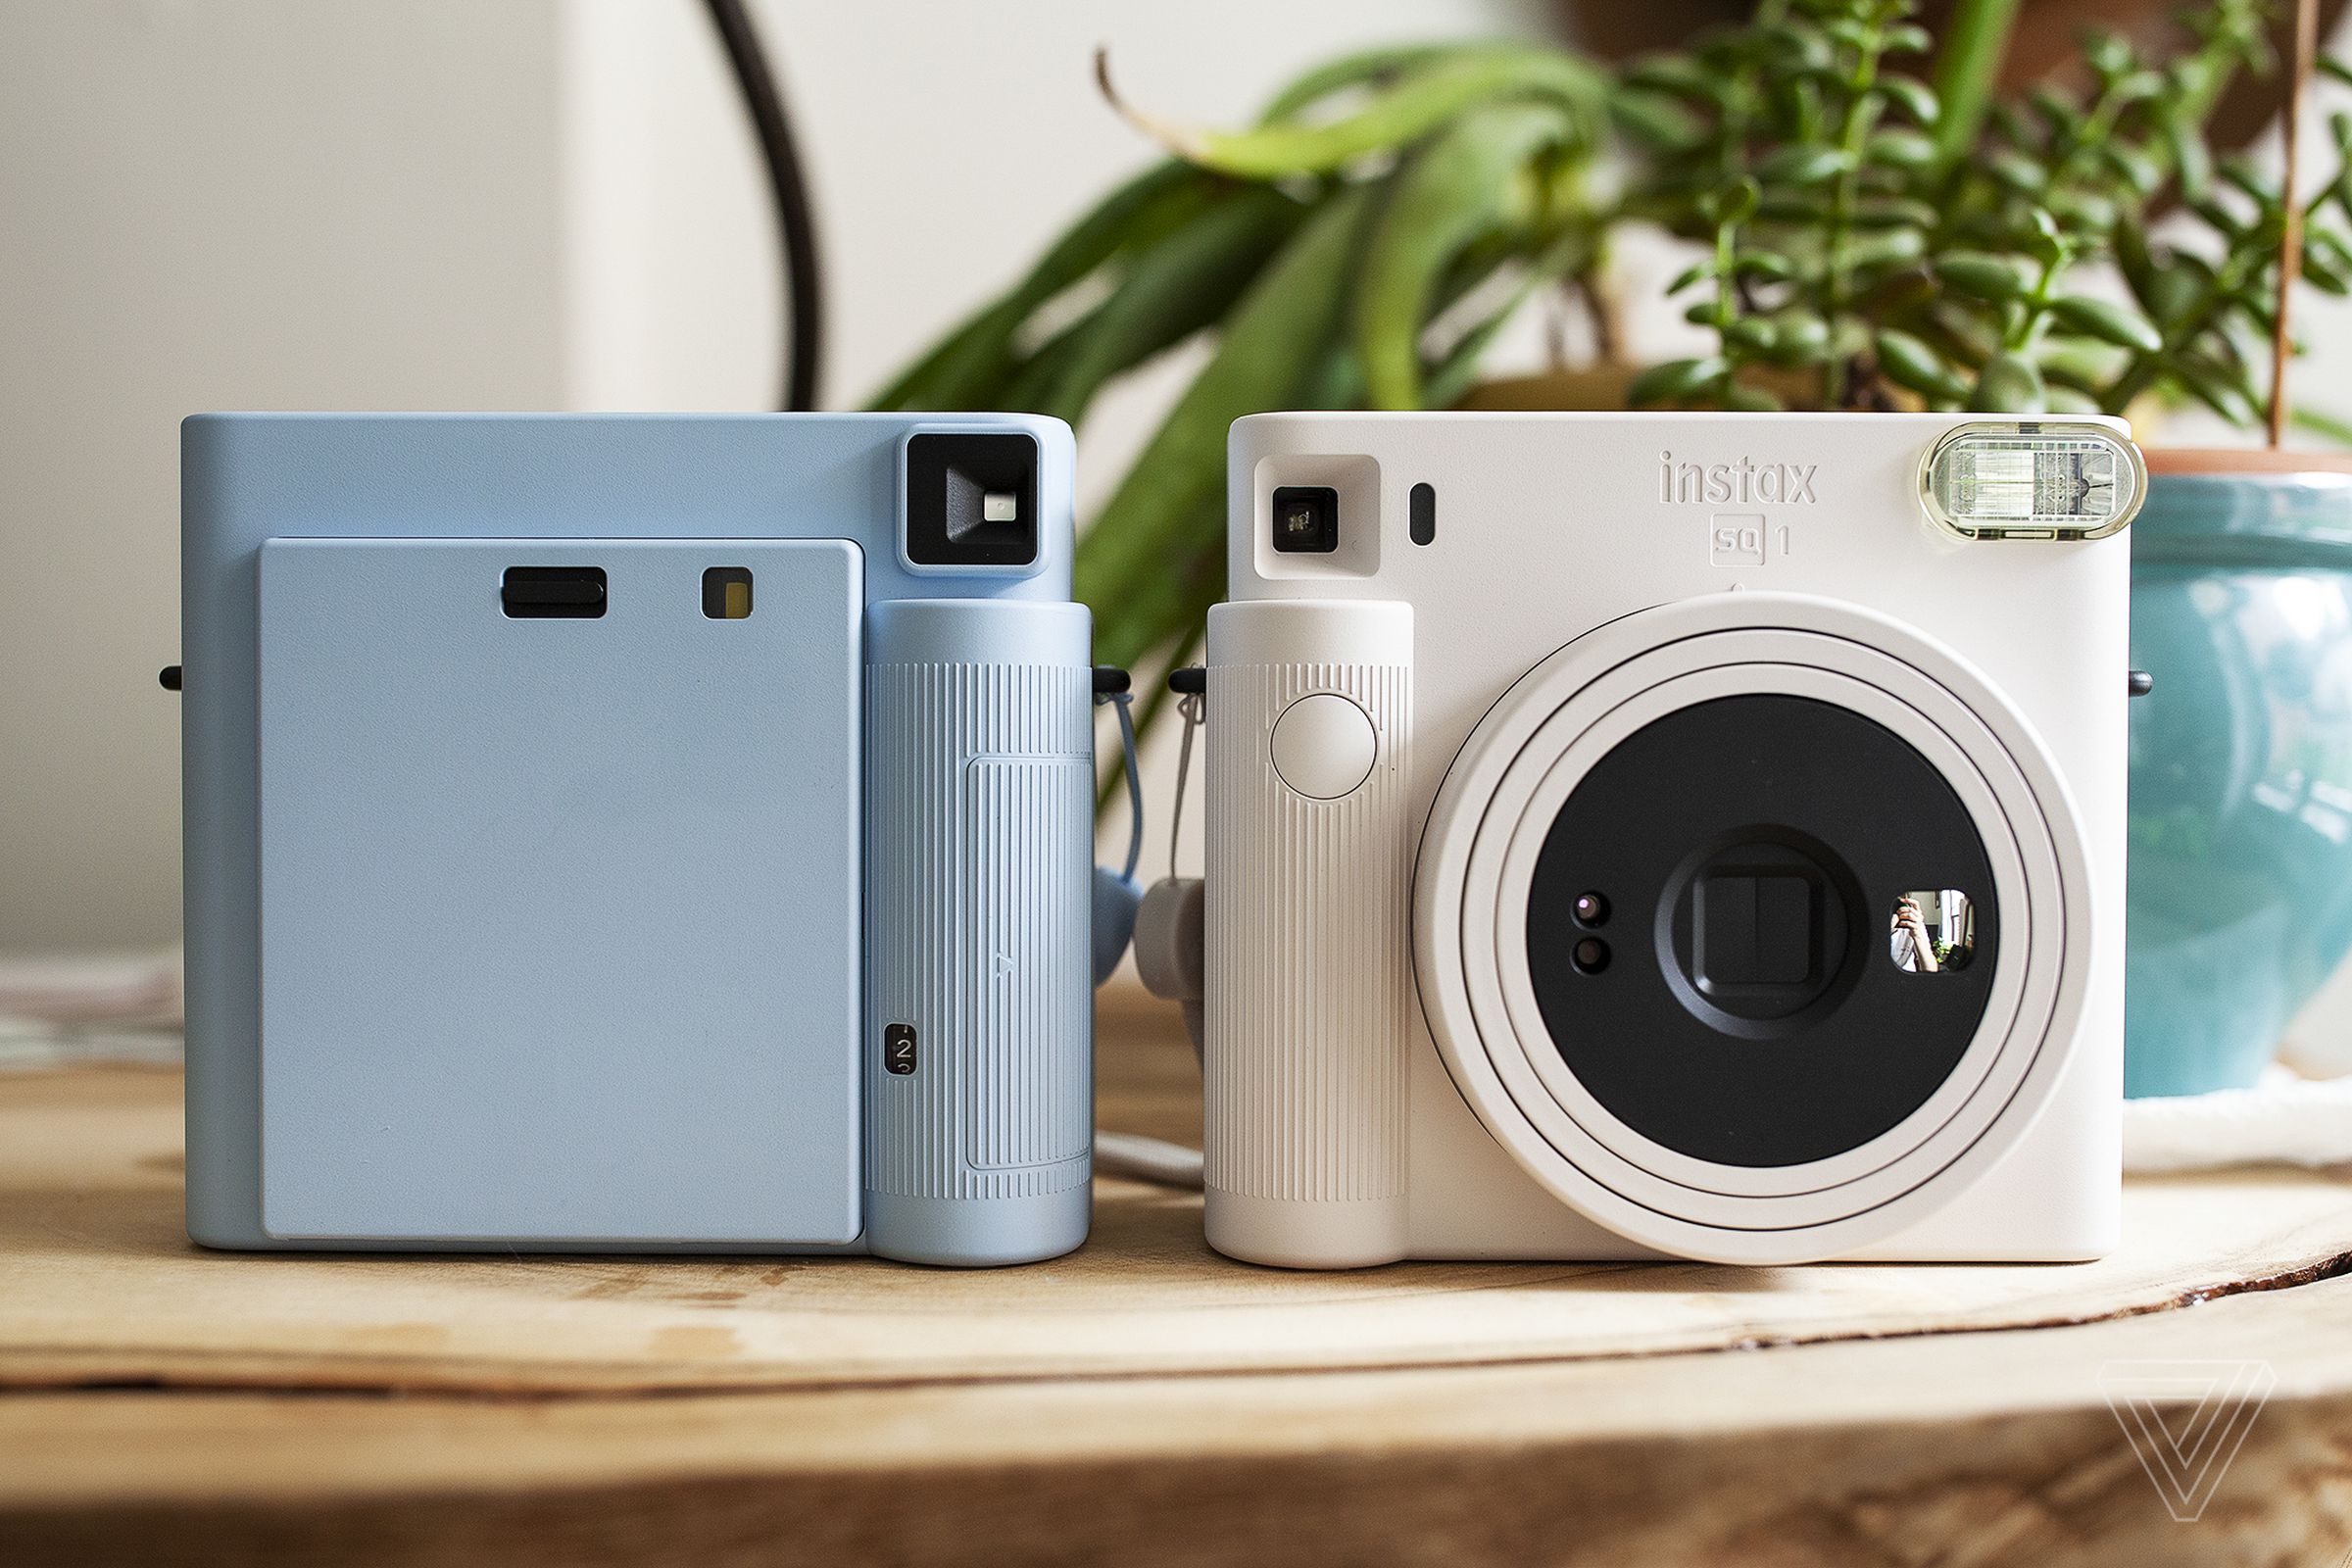 The Instax Square SQ1 is like the classic Polaroid but comes in a variety of fun colors.